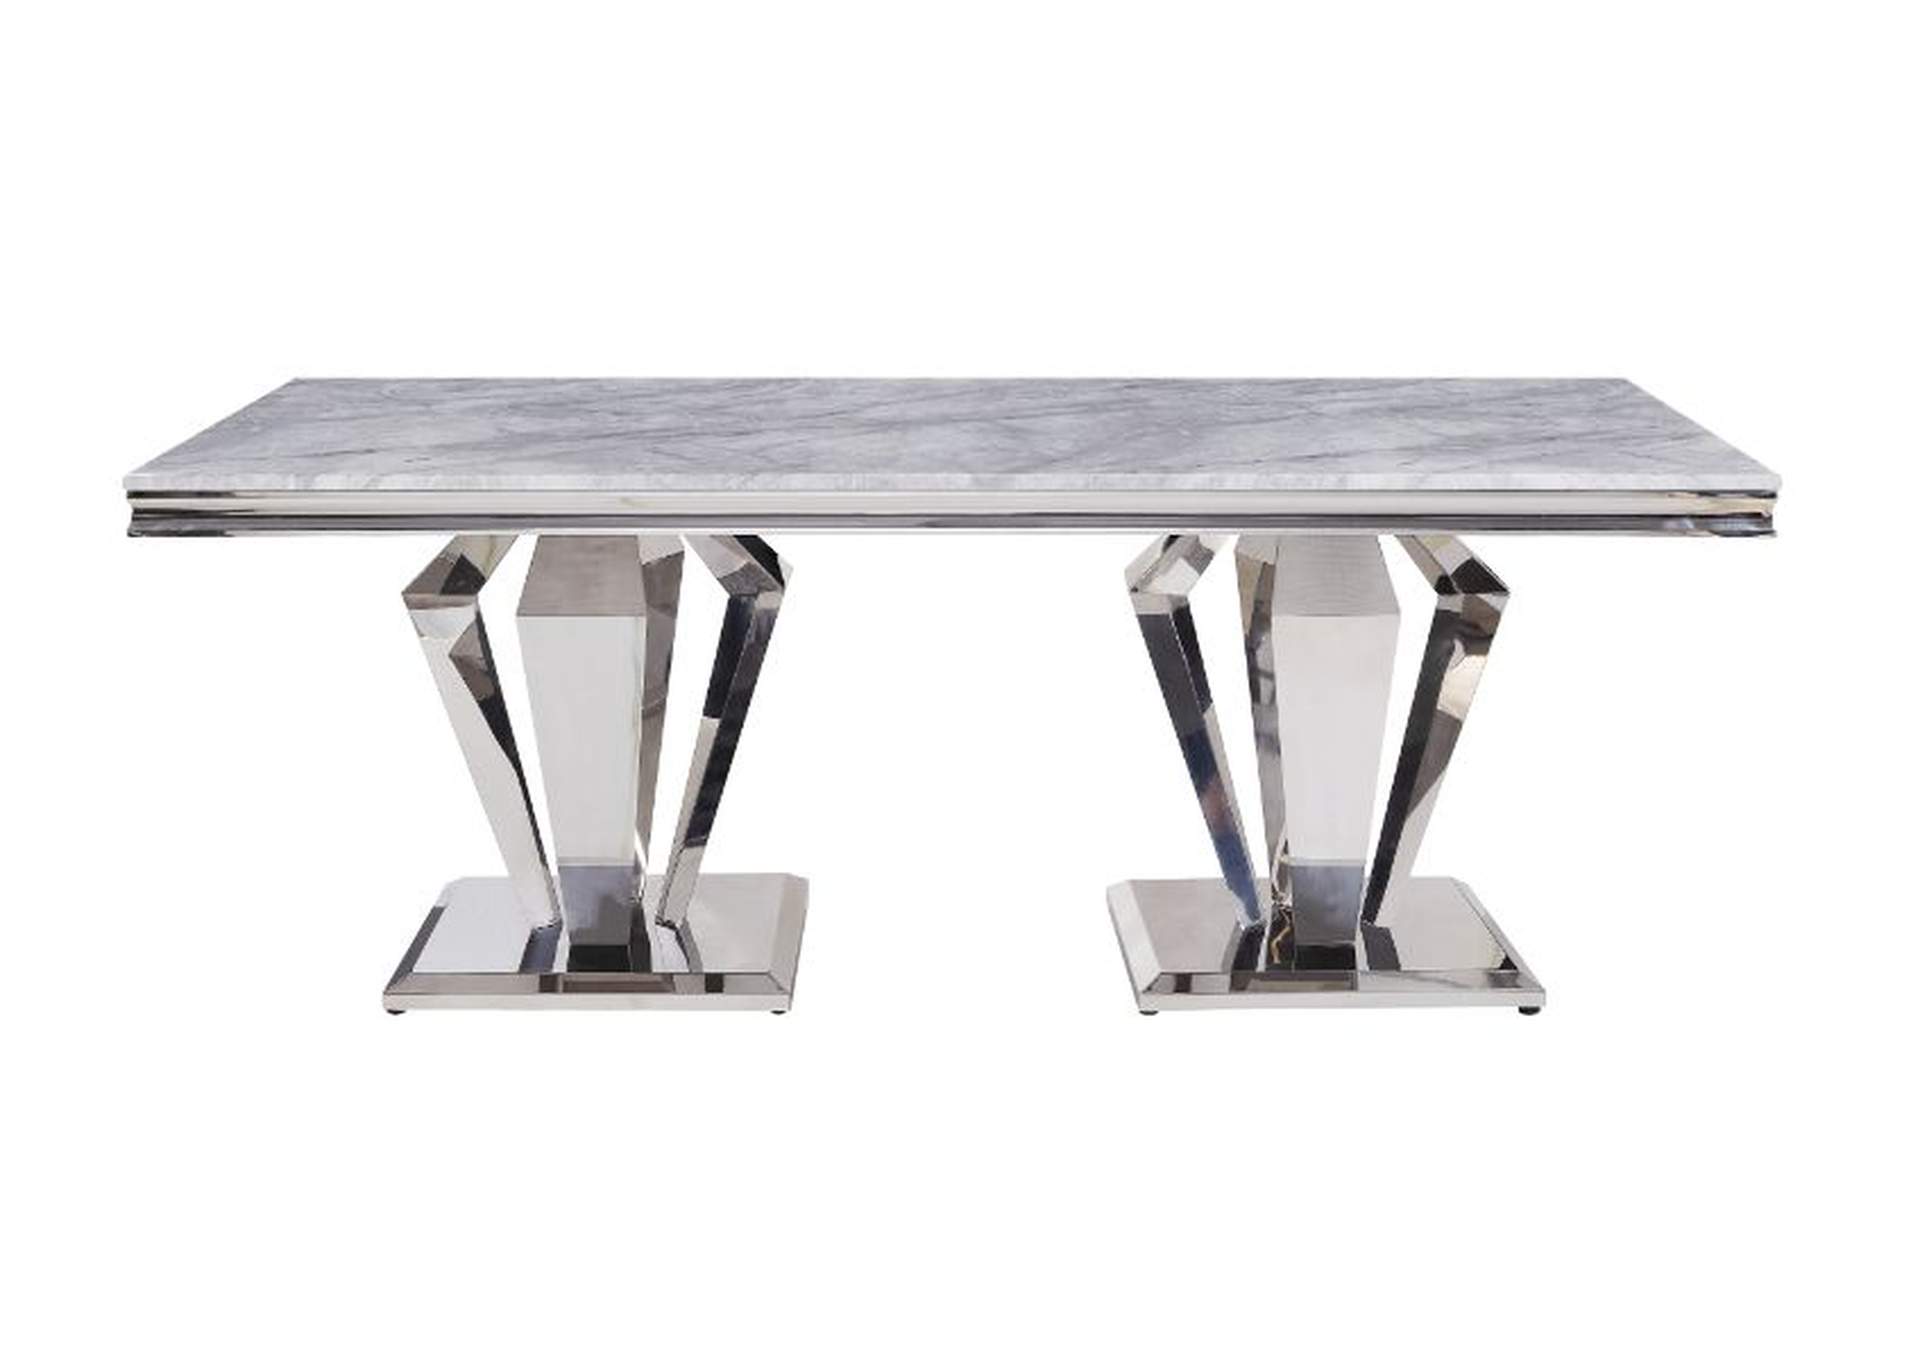 Satinka Light Gray Printed Faux Marble & Mirrored Silver Finish Dining Table,Acme